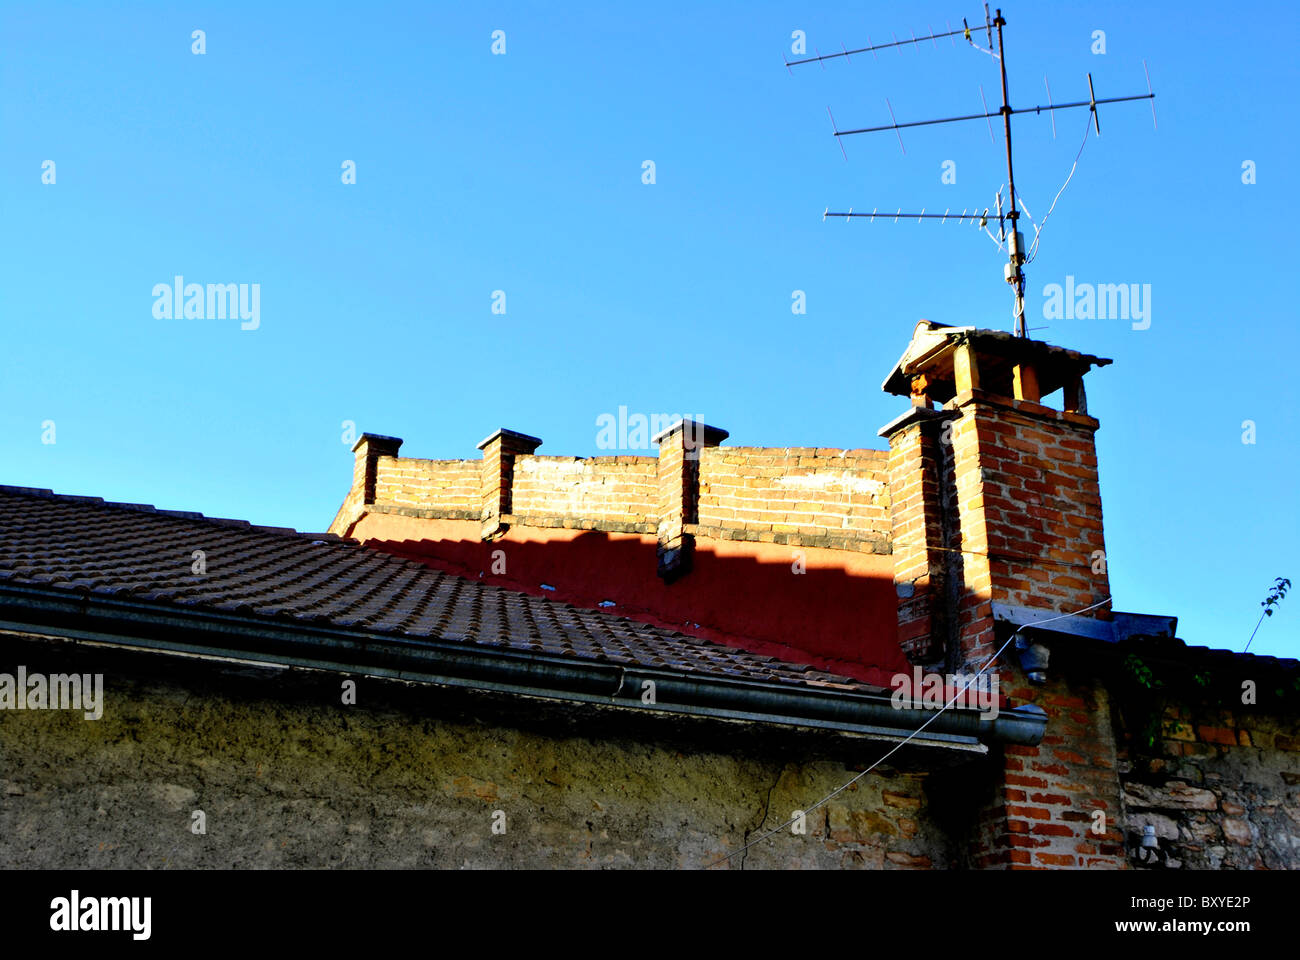 fireplace and roof with antennas for television Stock Photo